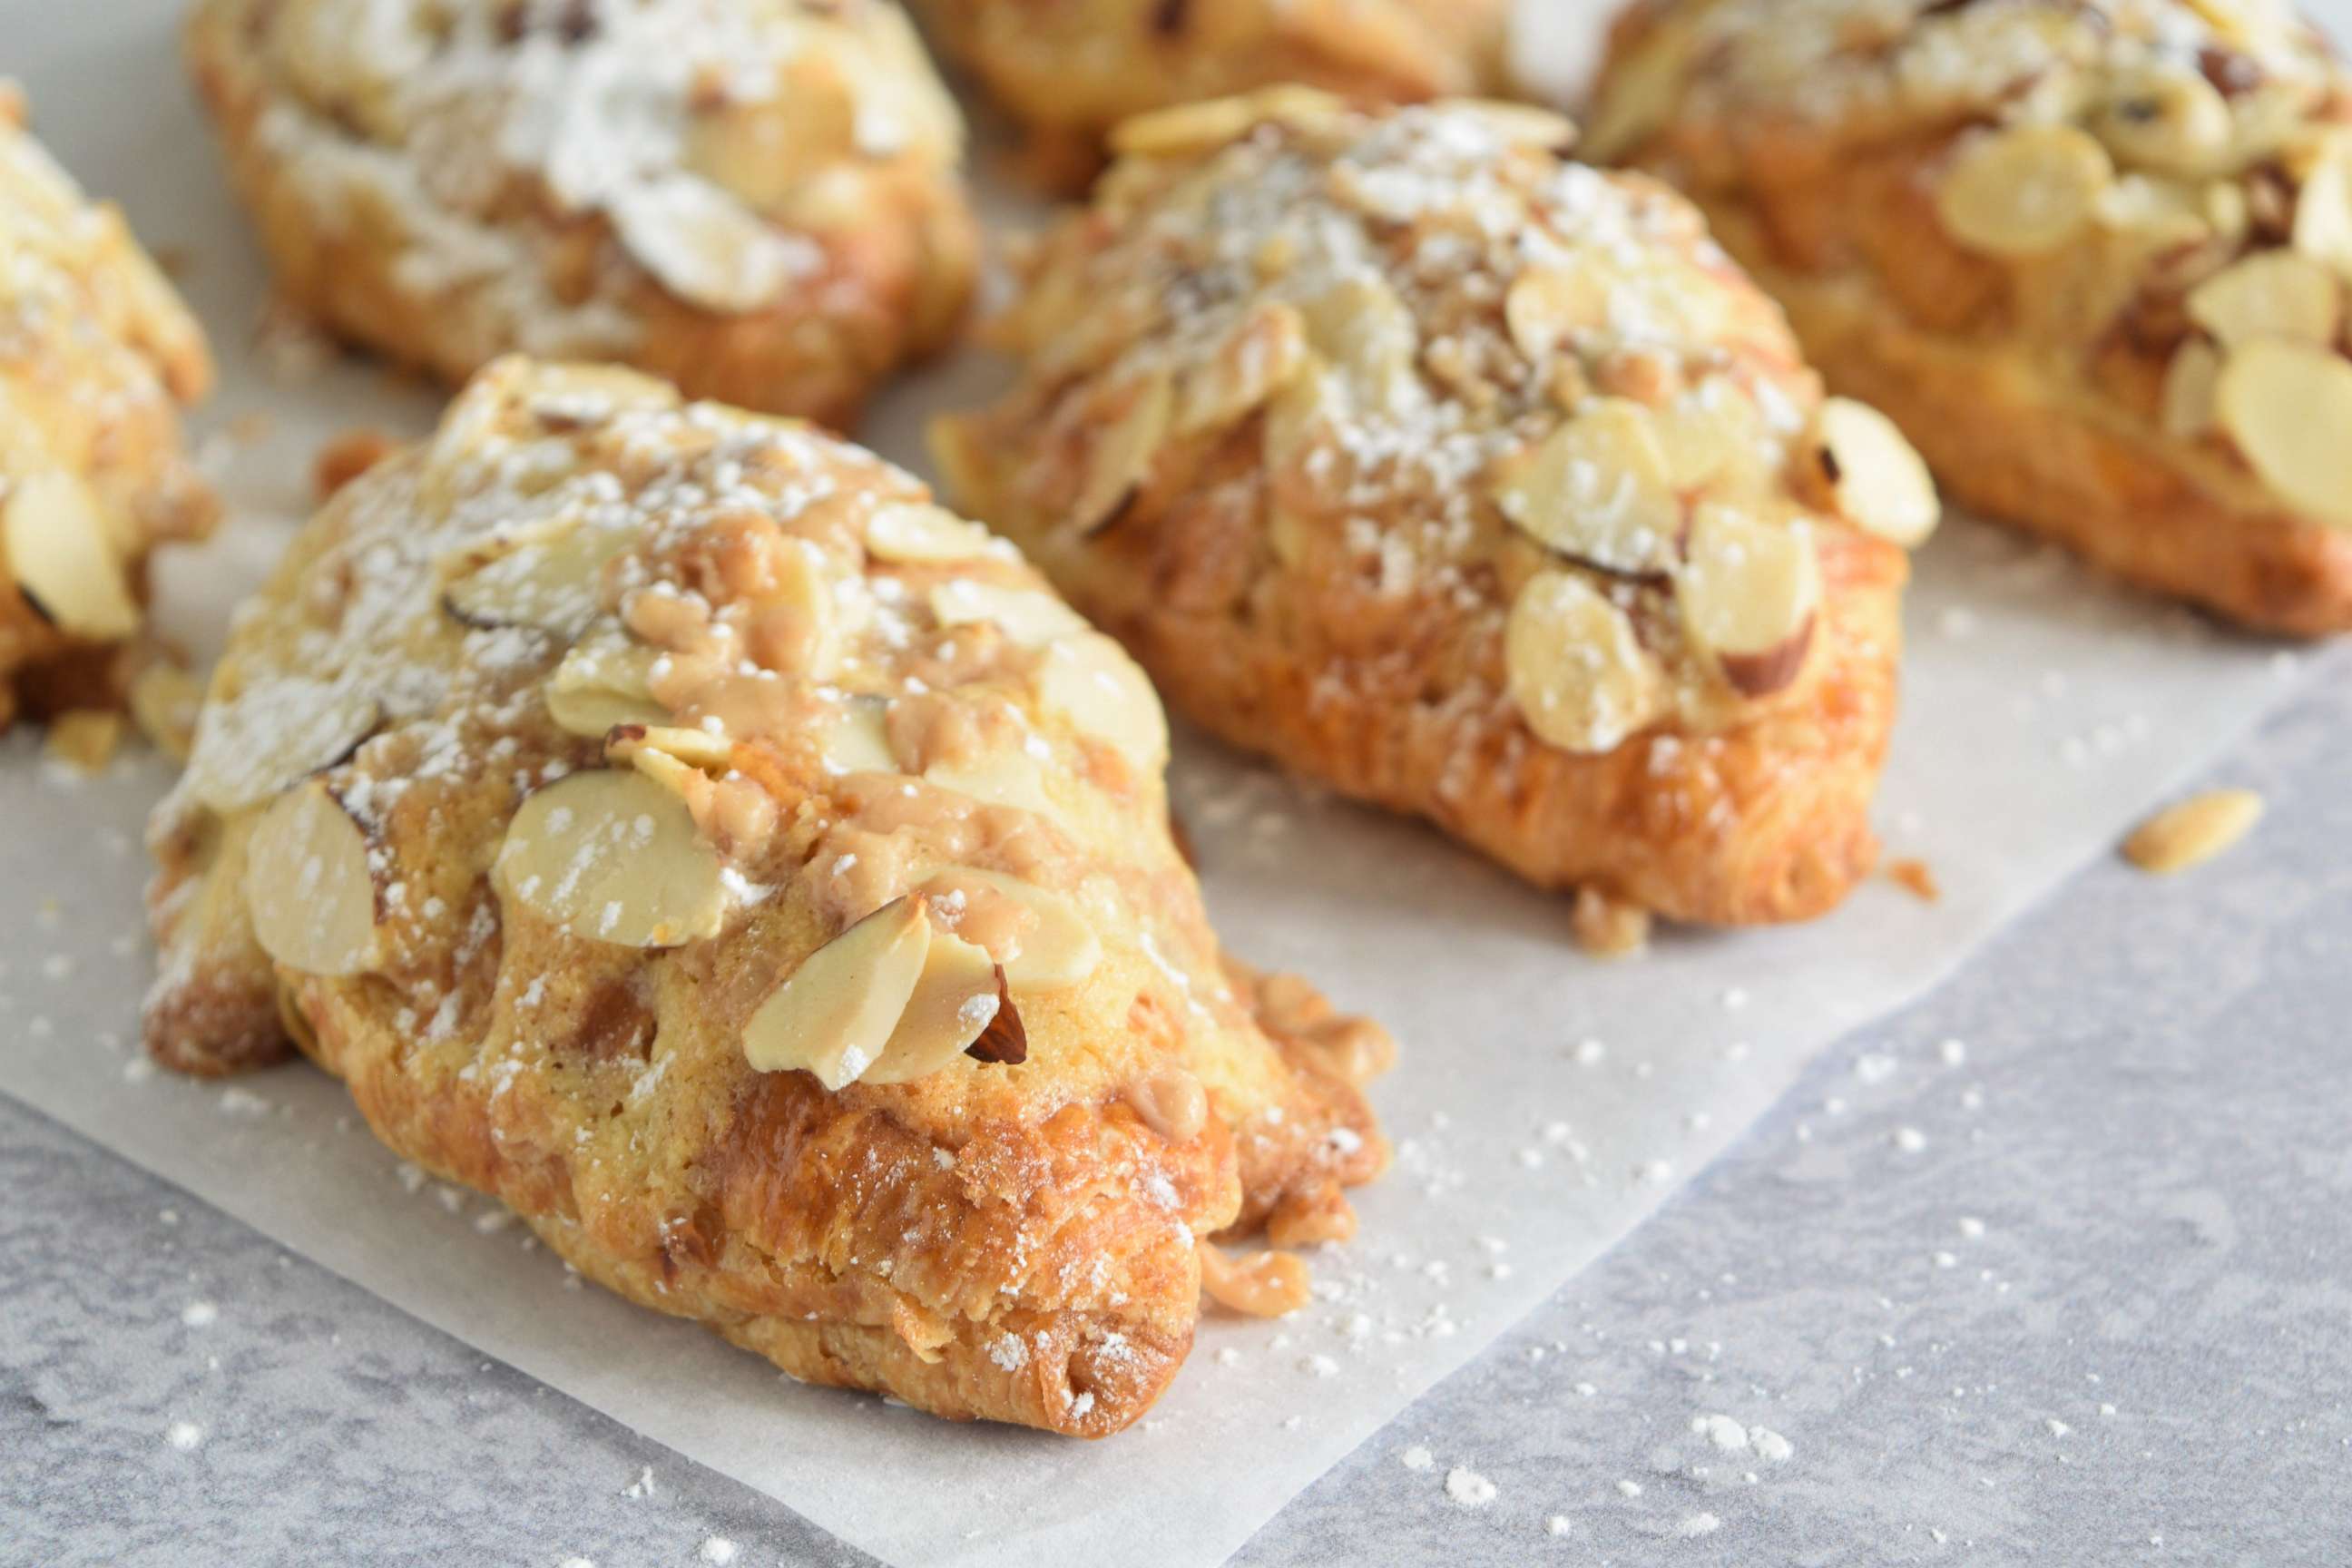 PHOTO: Almond croissants with cream filling.